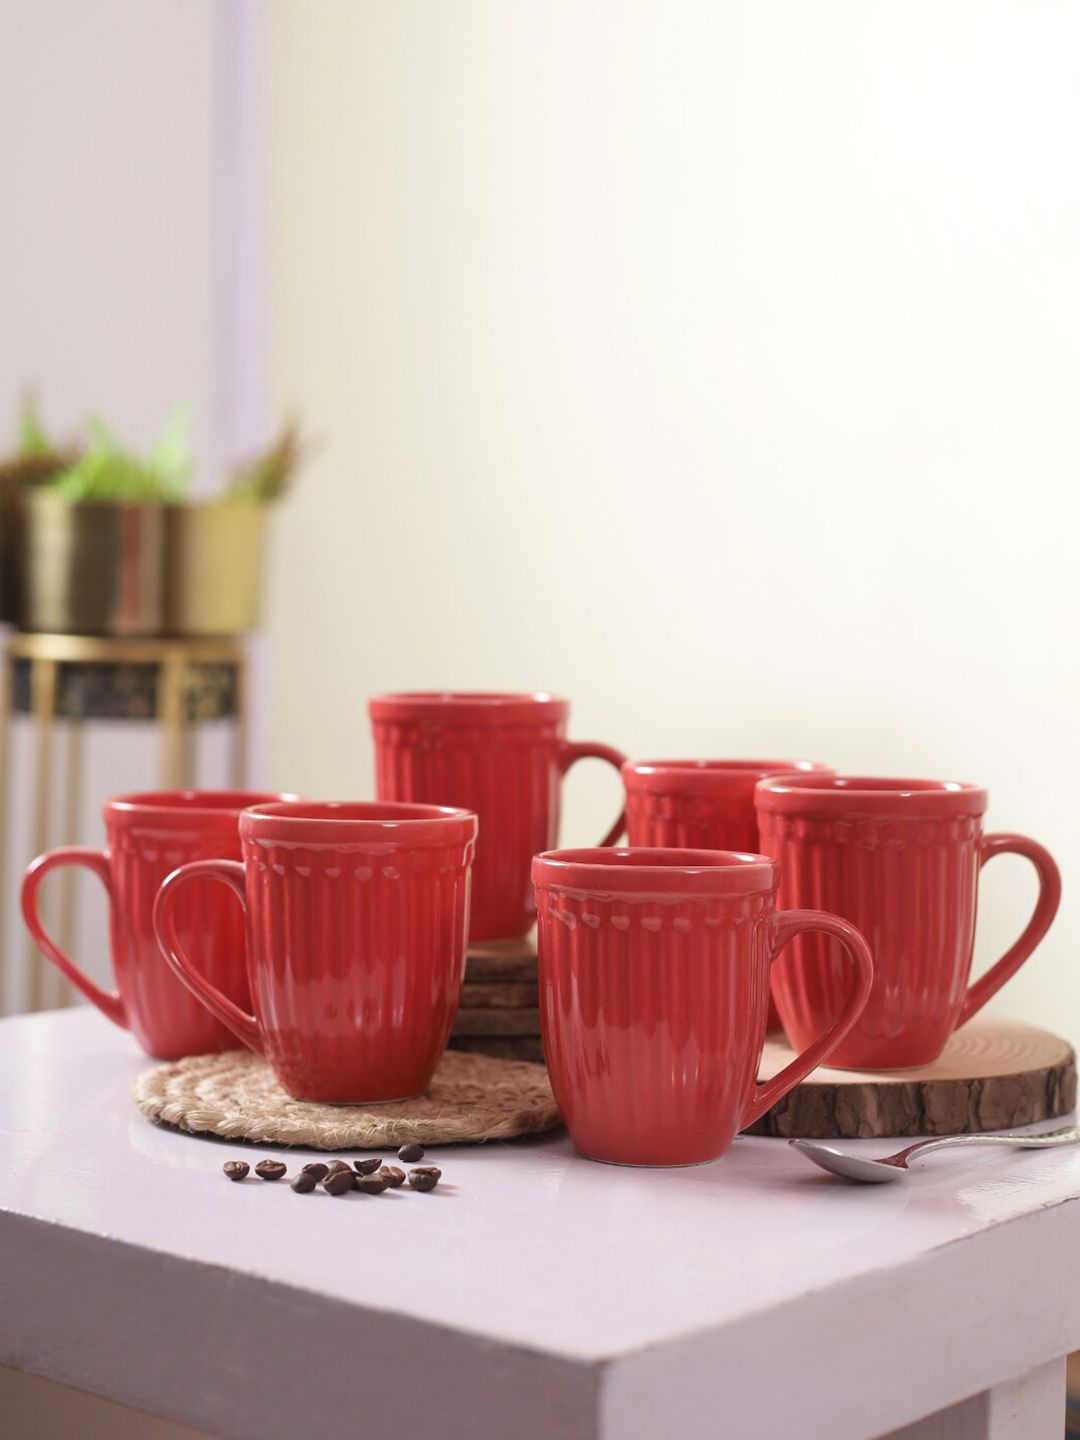 Aapno Rajasthan Red Set of 6 Solid Ceramic Glossy Cups Price in India